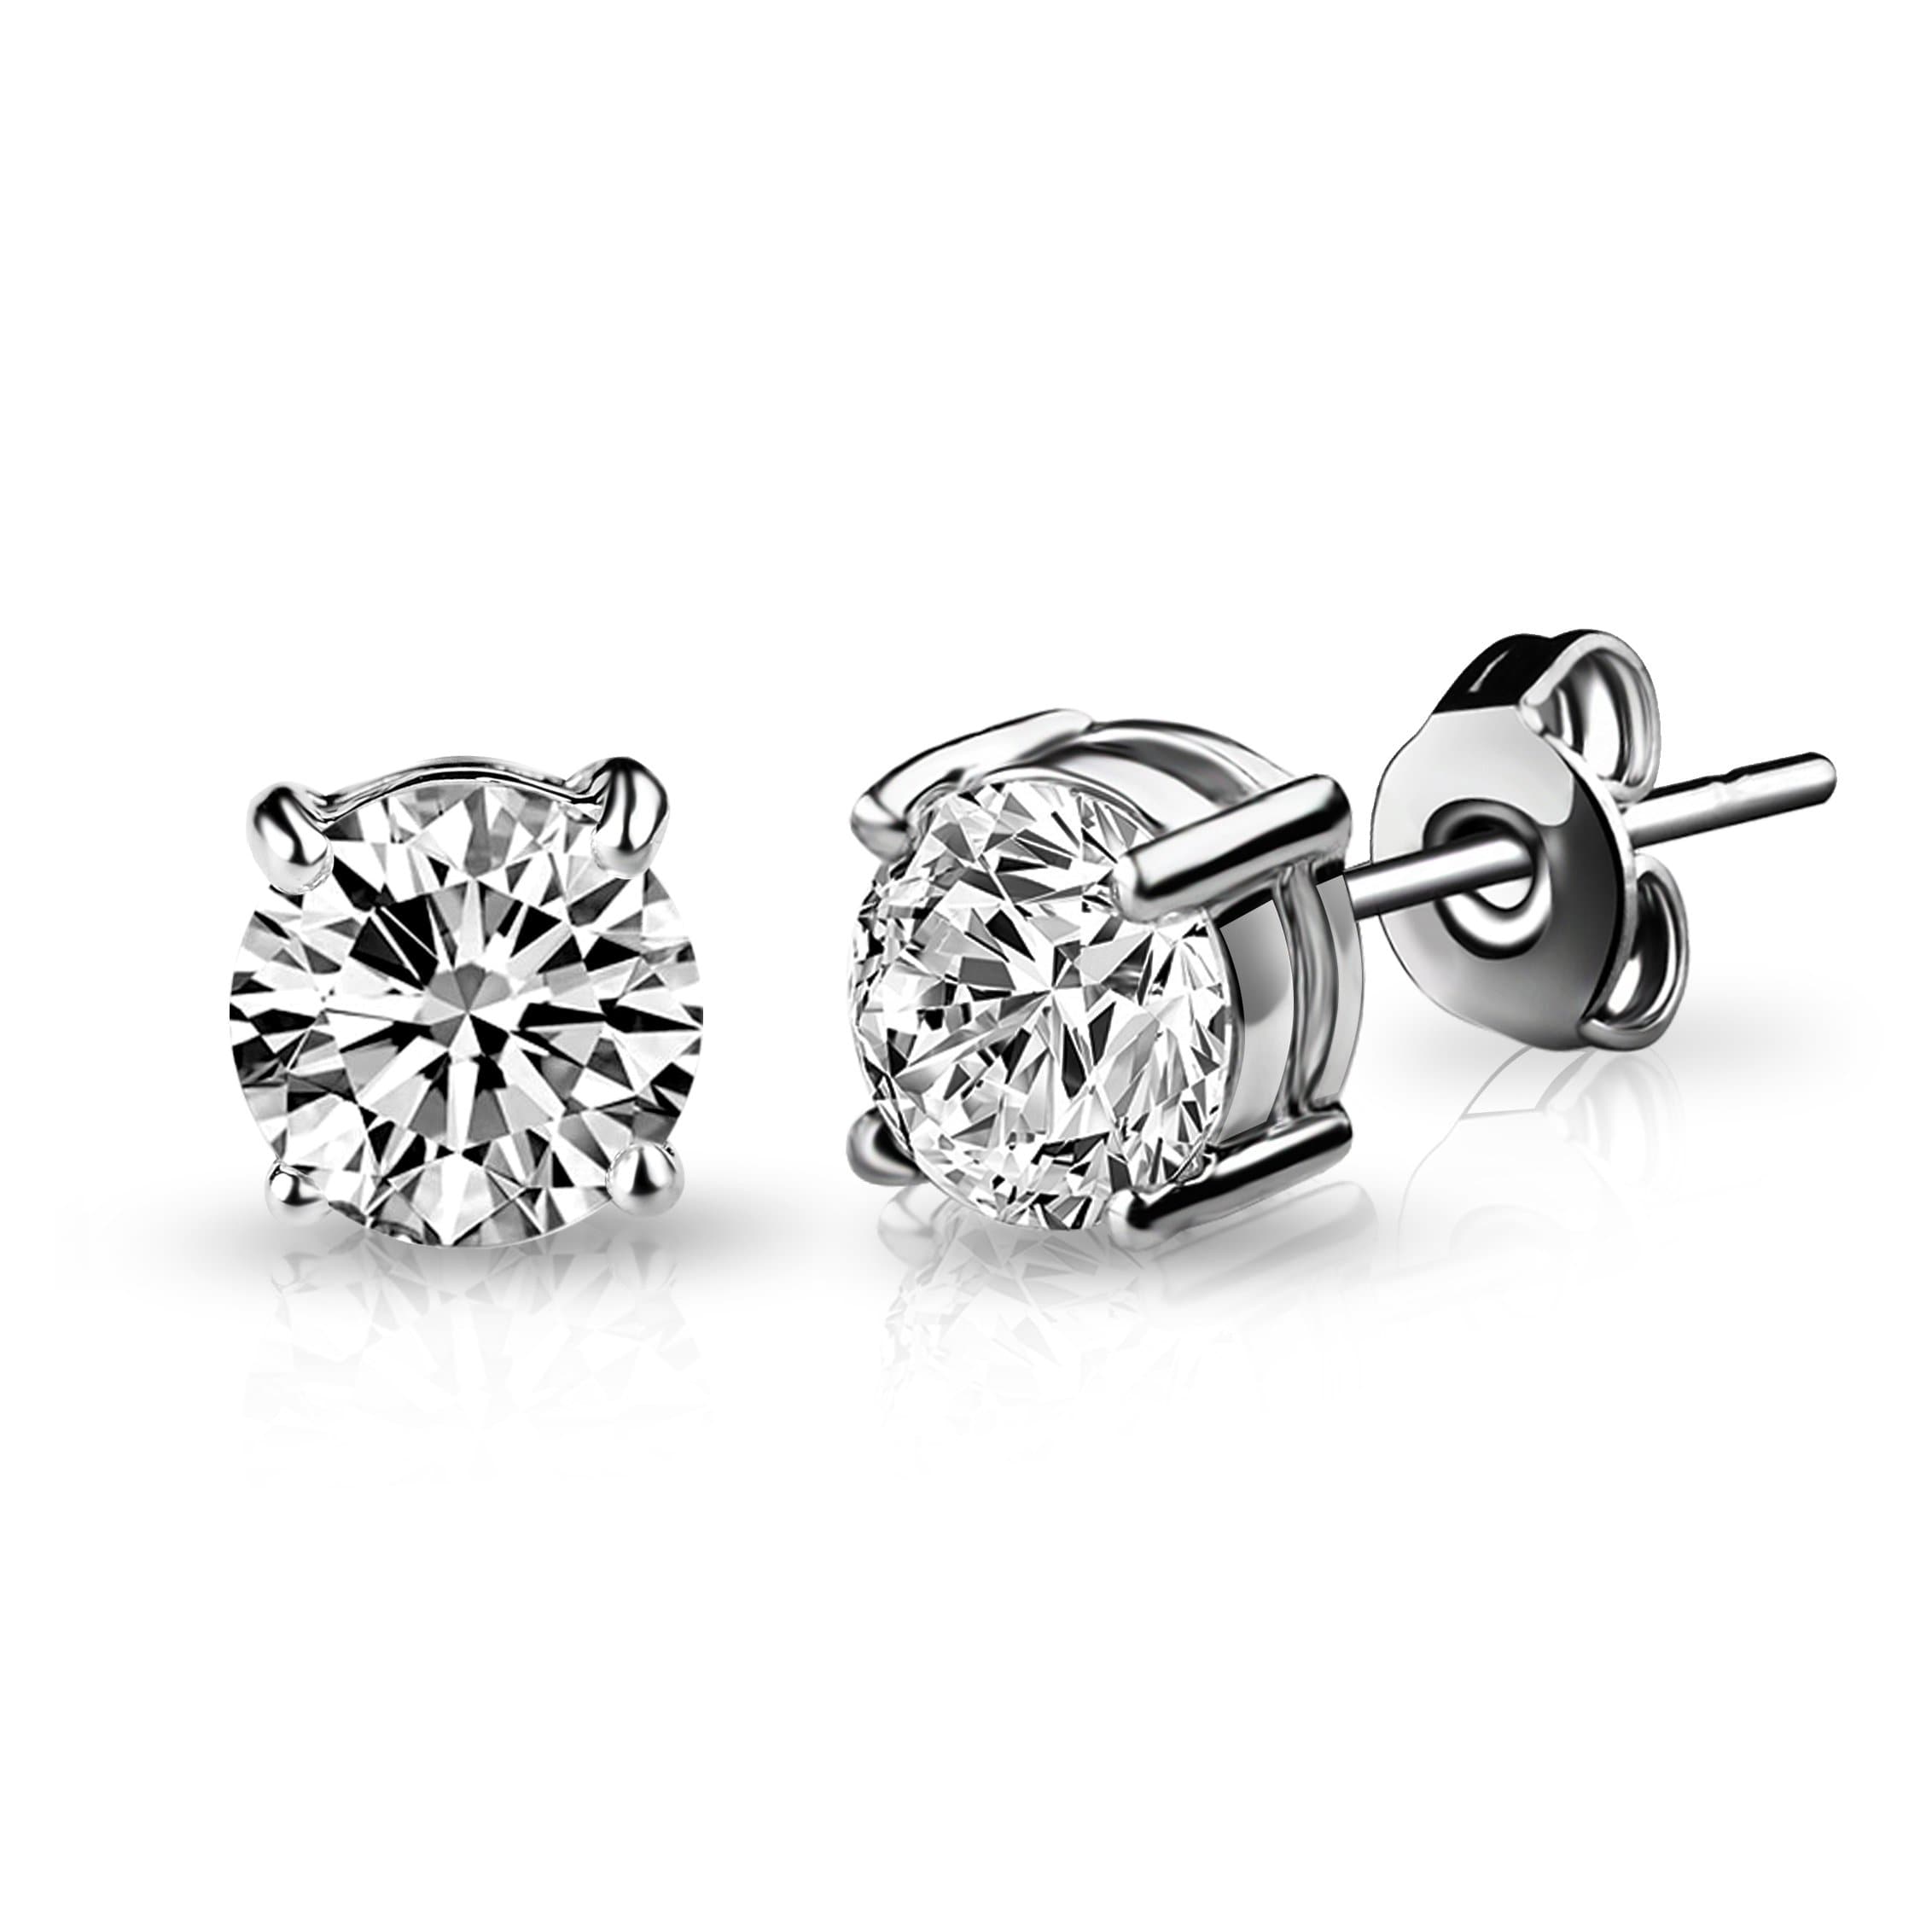 Silver Plated Solitaire Crystal Stud Earrings Created with Zircondia® Crystals by Philip Jones Jewellery